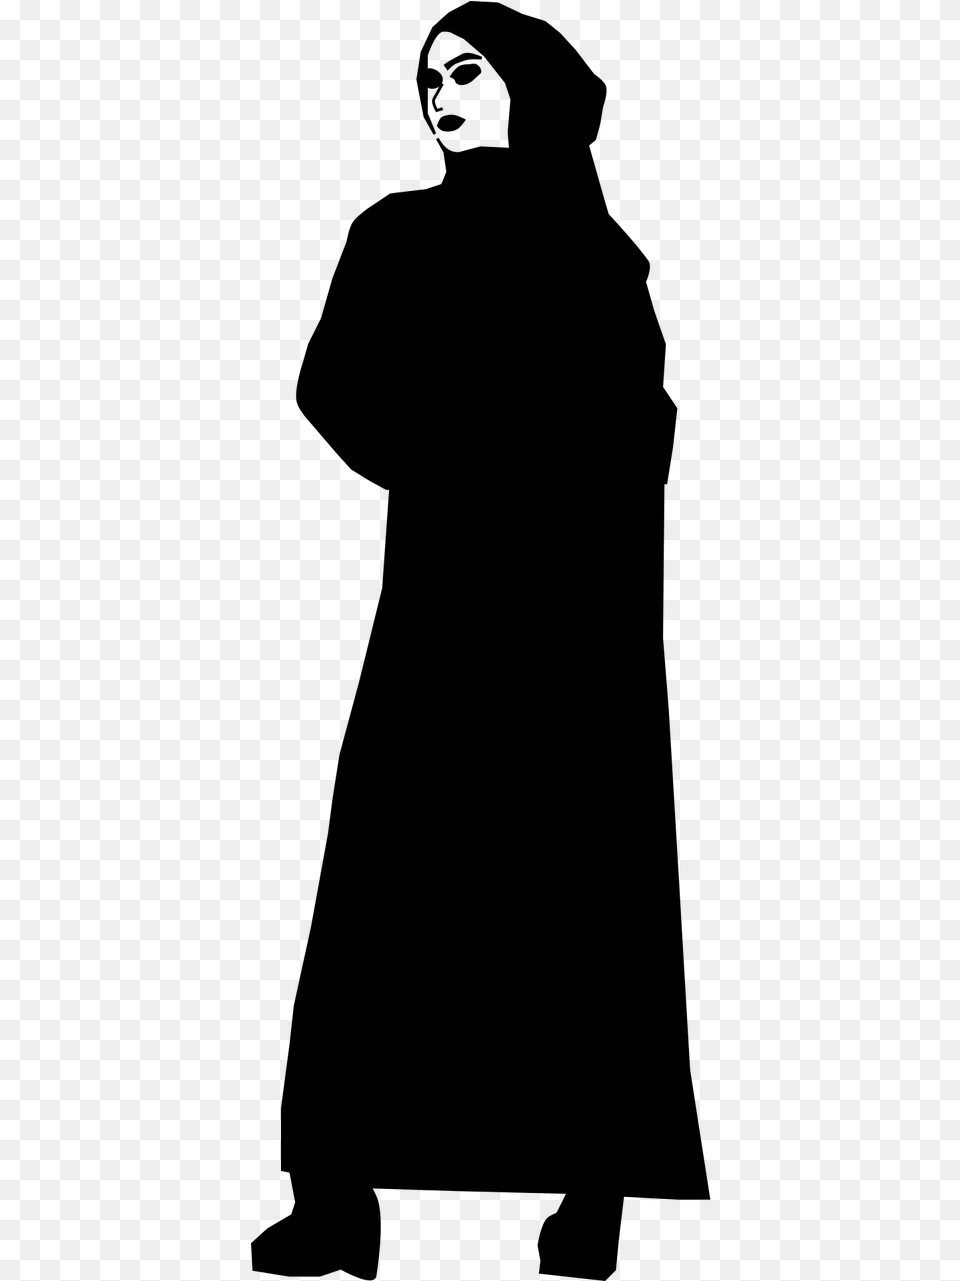 Muslim Silhouette Woman Photo Silhouette Woman With Hijab, Gray Free Png Download